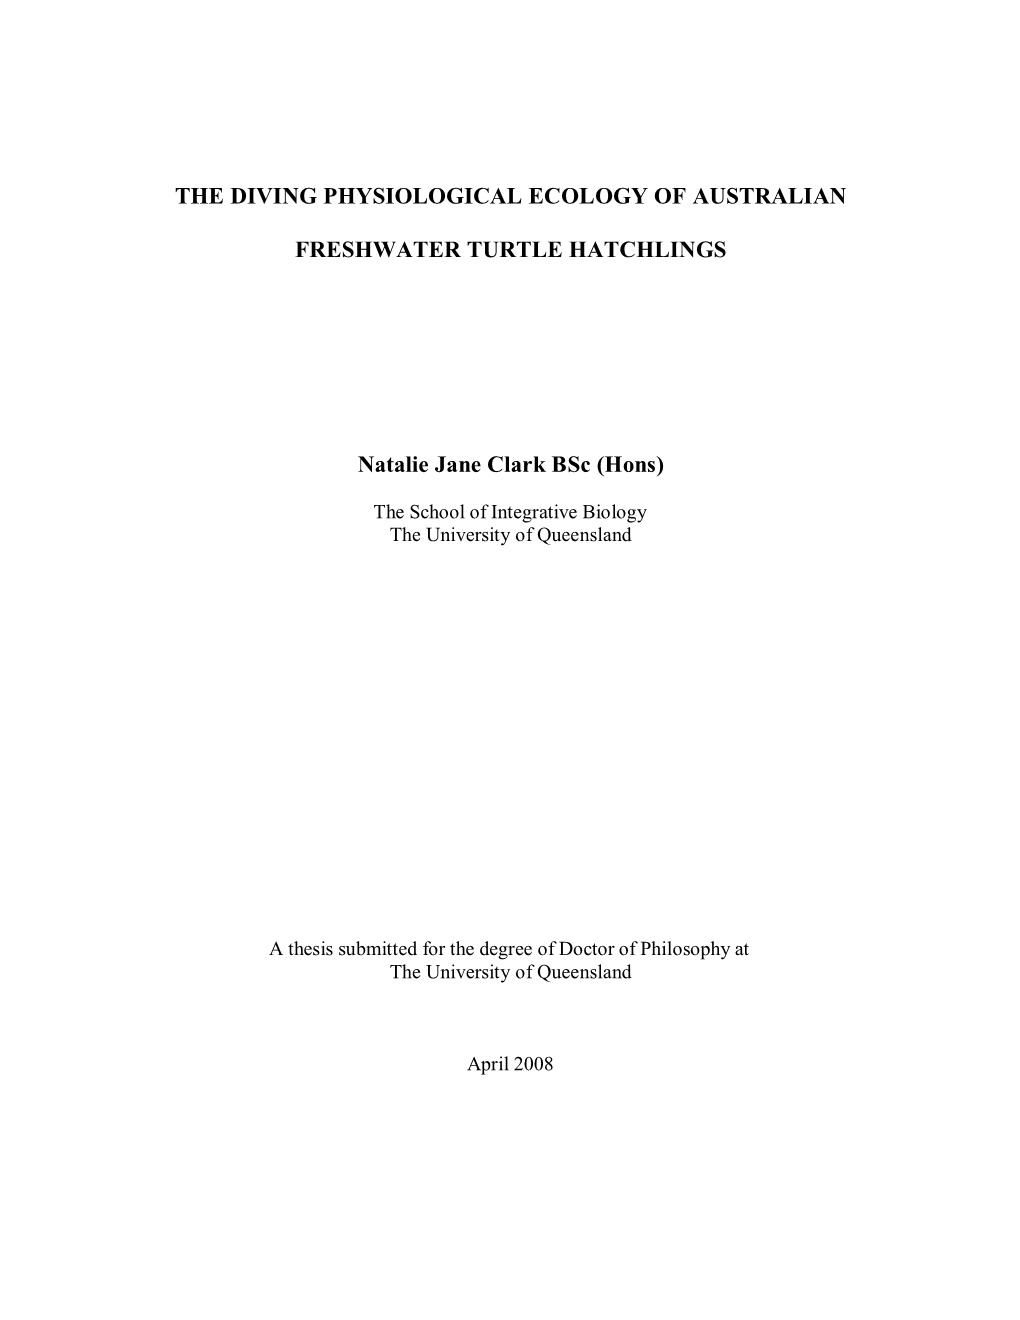 The Diving Physiological Ecology of Australian